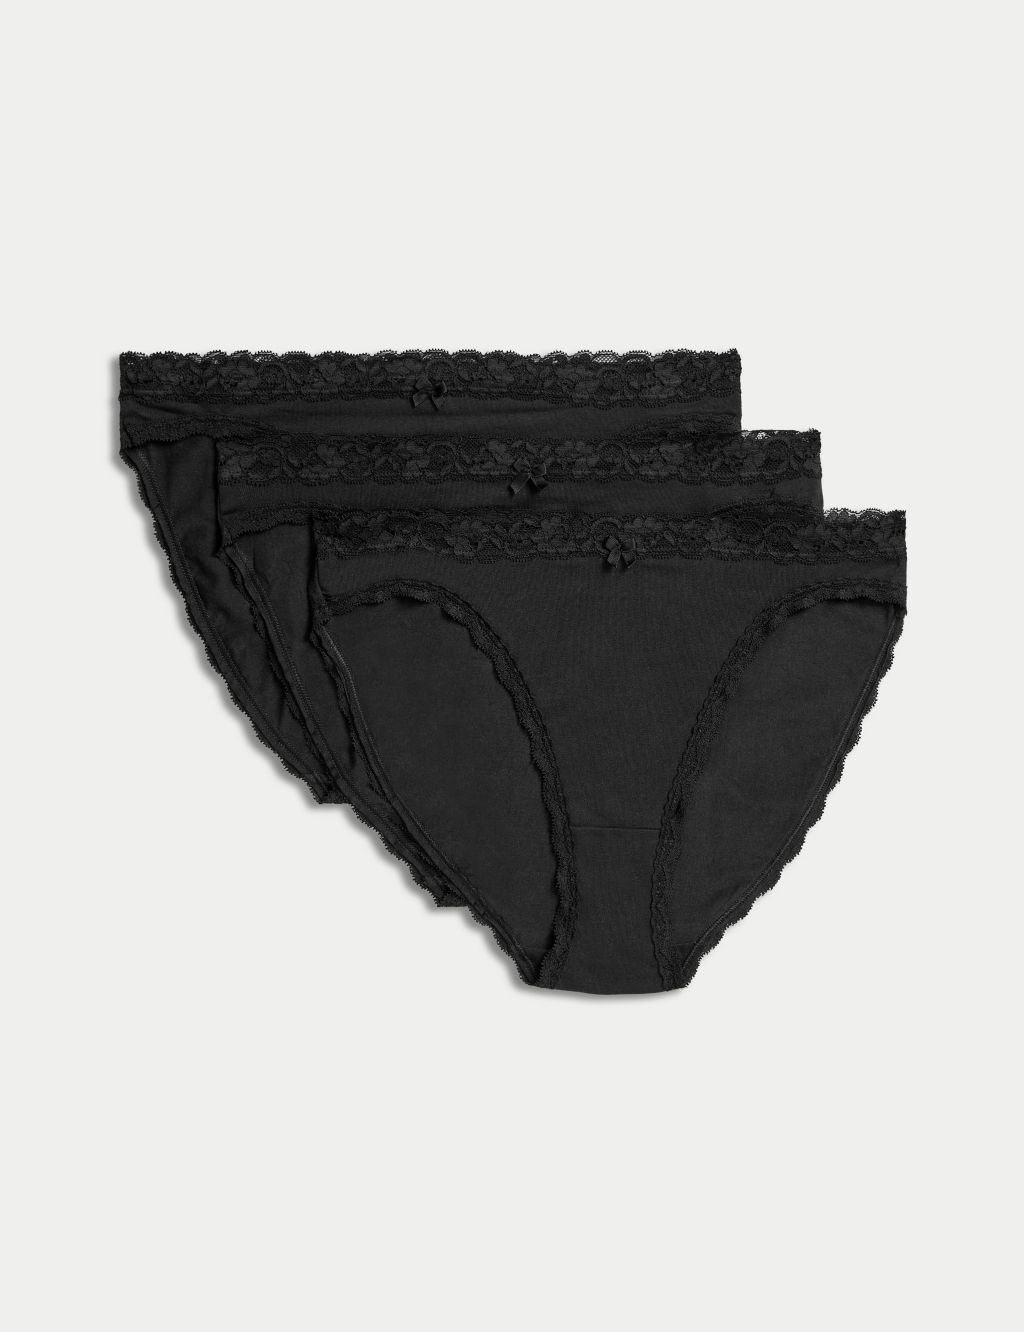 M&S Black High Rise Full Coverage Microfibre Briefs Panties Knickers Size  6-20